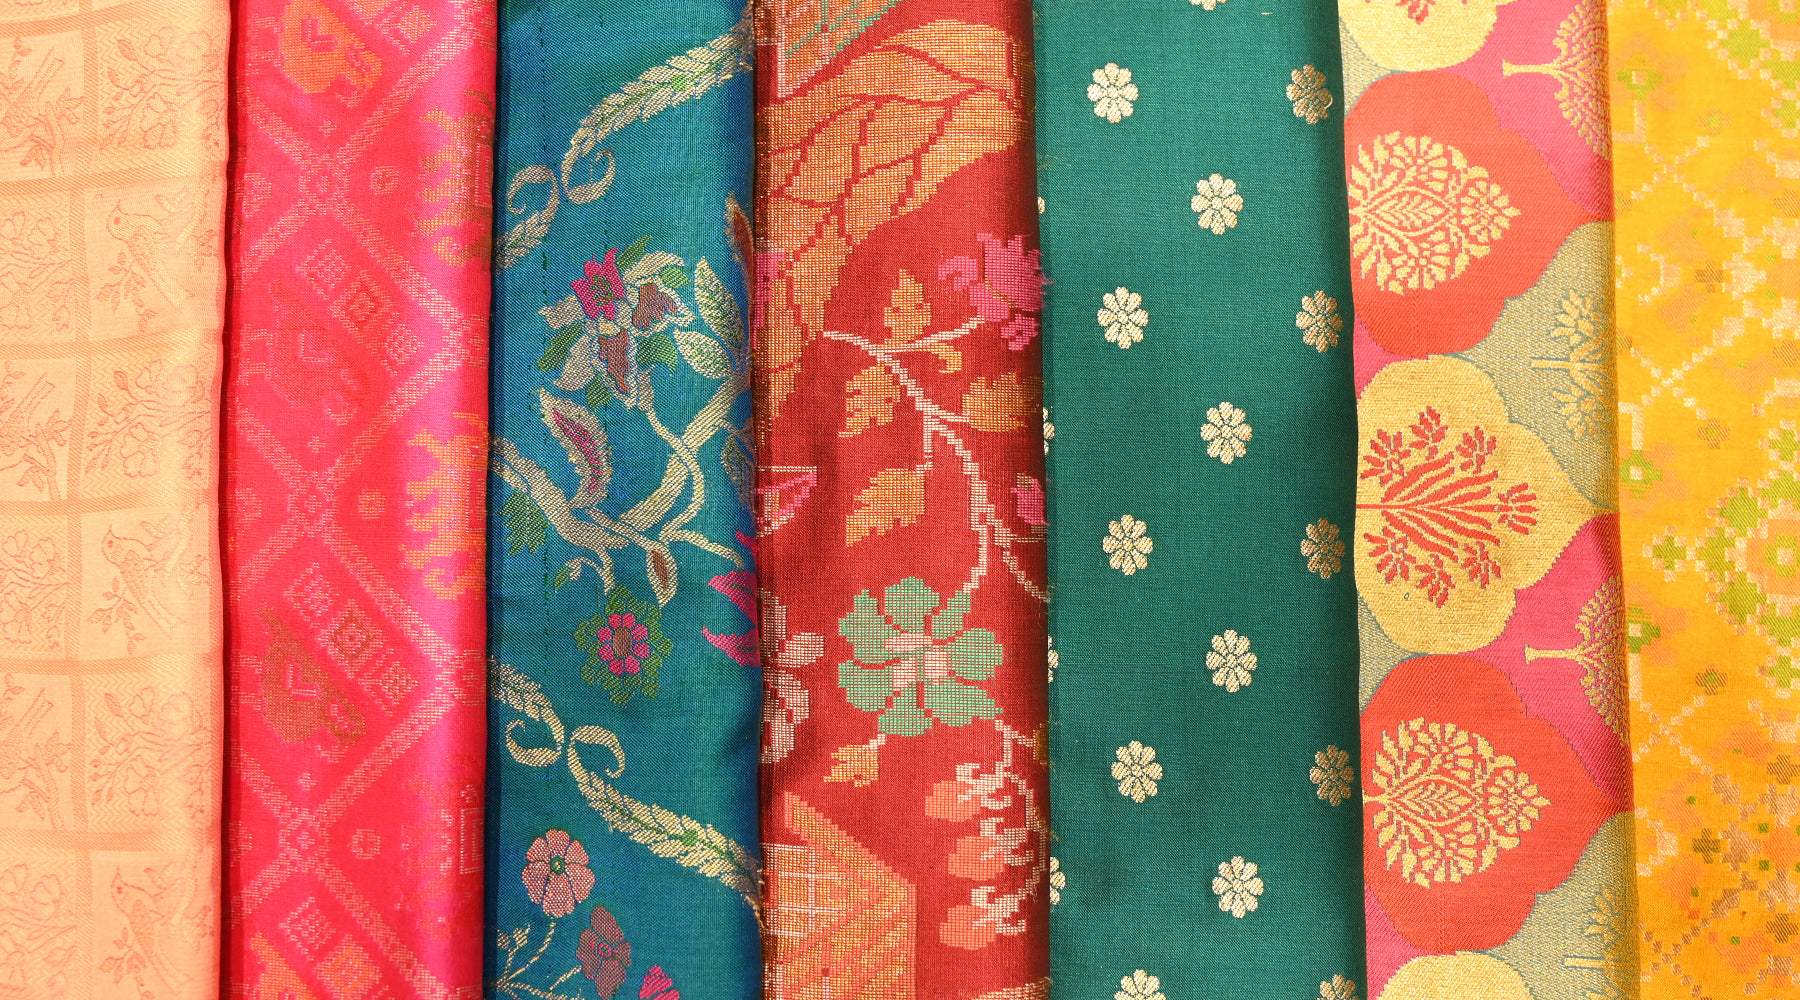 8 Contemporary Banarasi Saree Motifs and Patterns! - Singhania's Heirloom Collection. - Singhania's